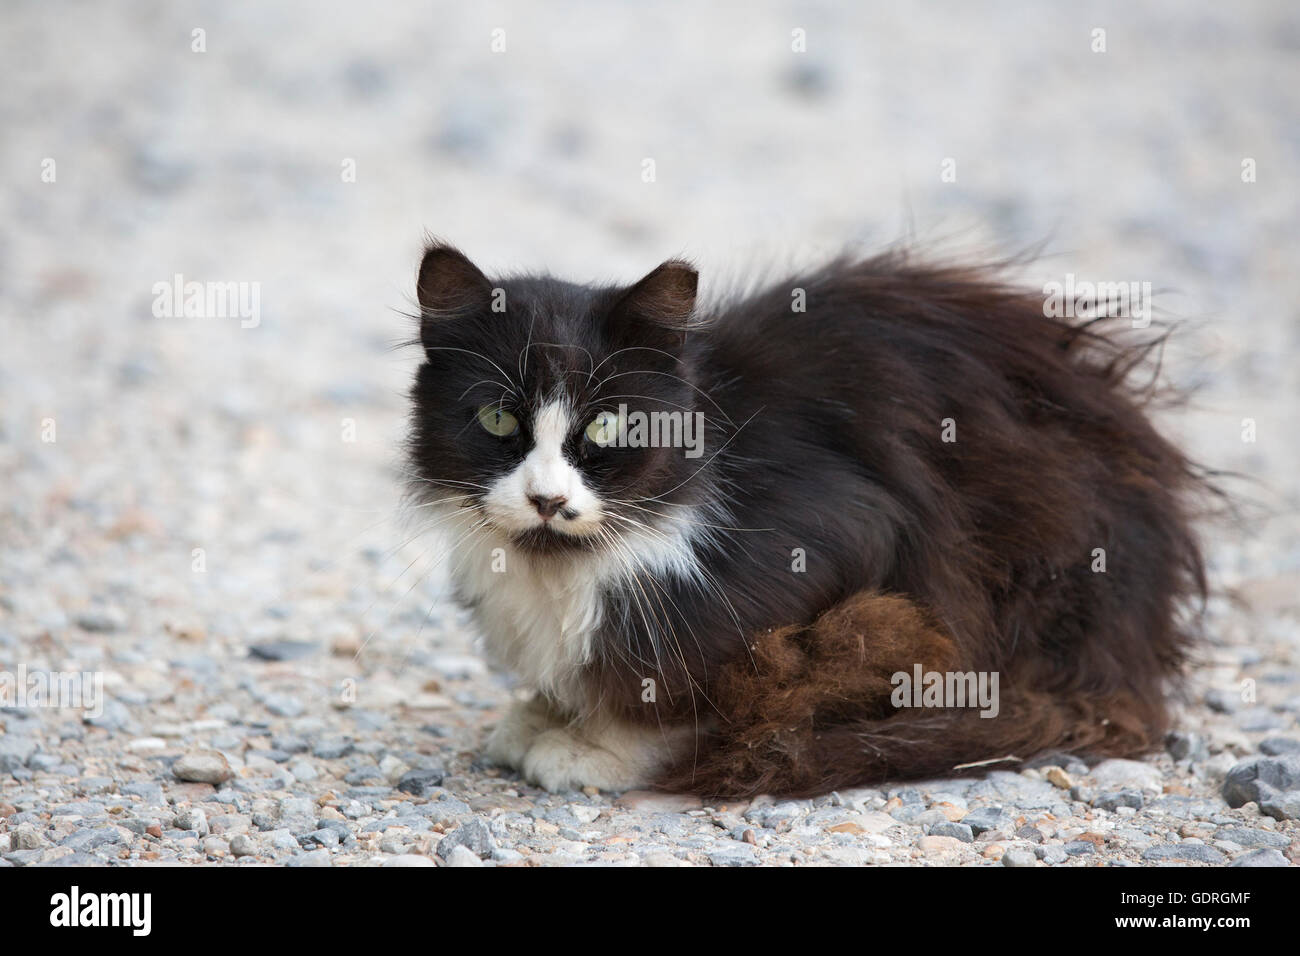 Scruffy stray cat with matted fur and missing ear tip, in parking lot Stock Photo